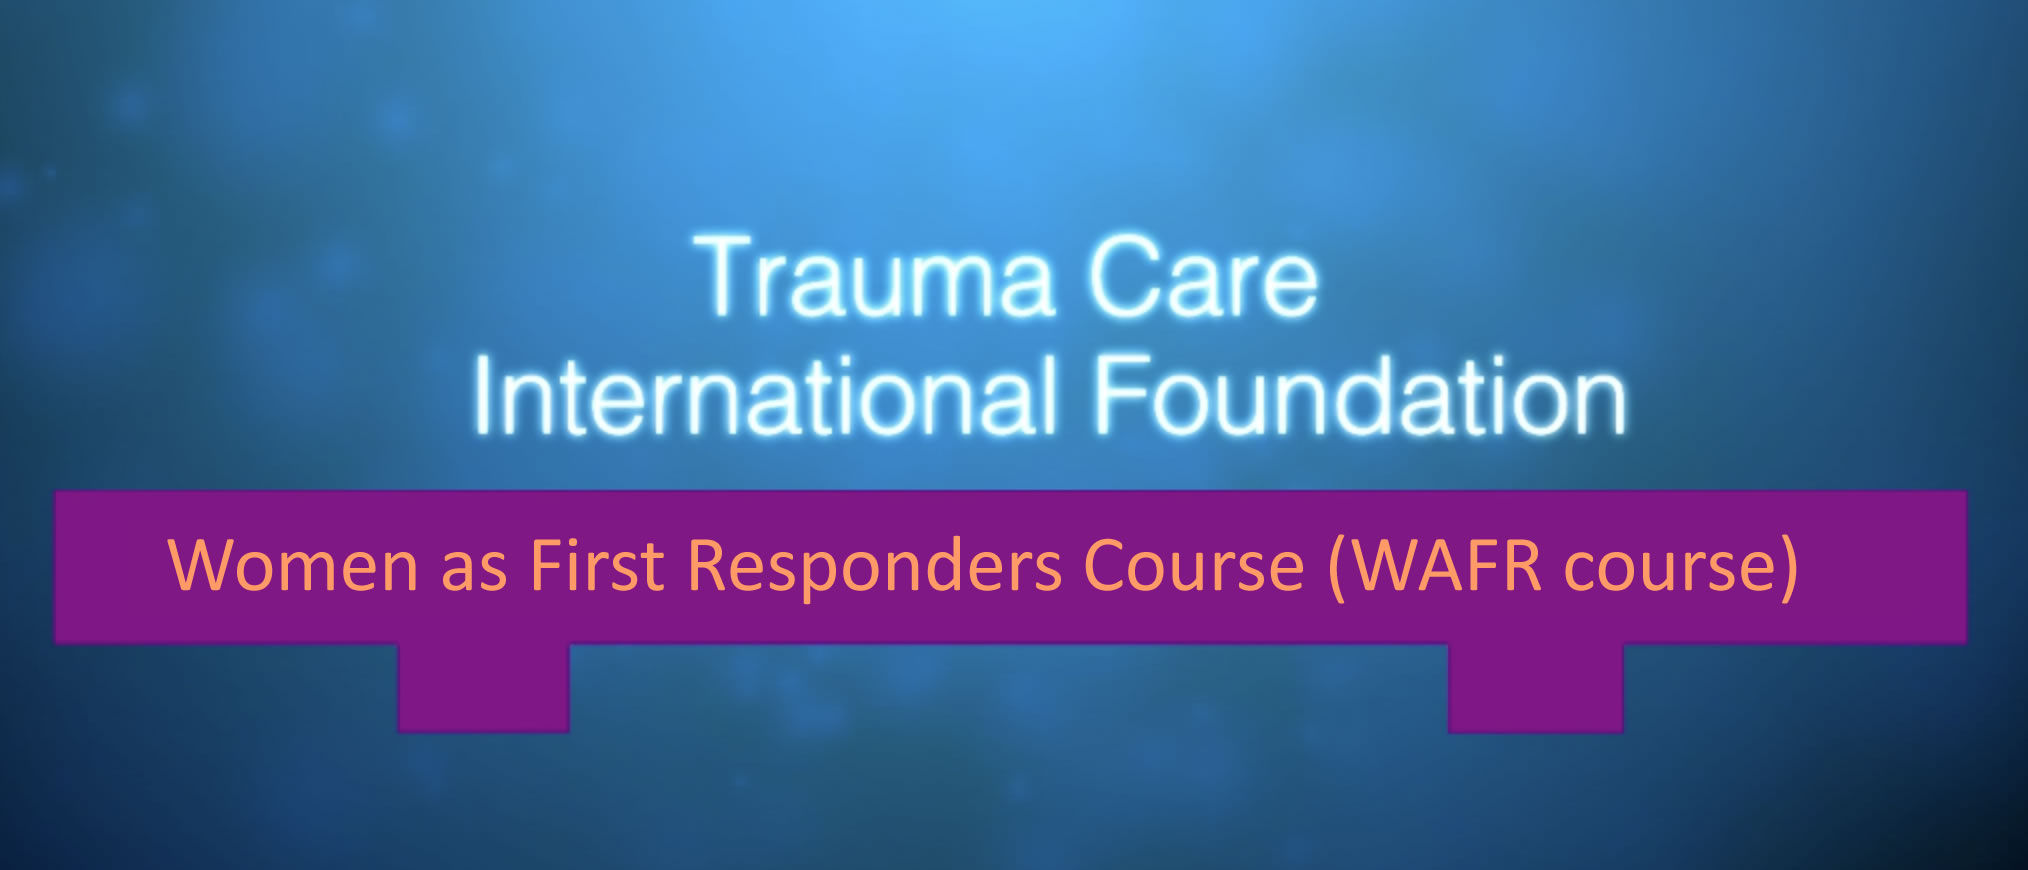 Women As First Responders Course (WAFR Course)